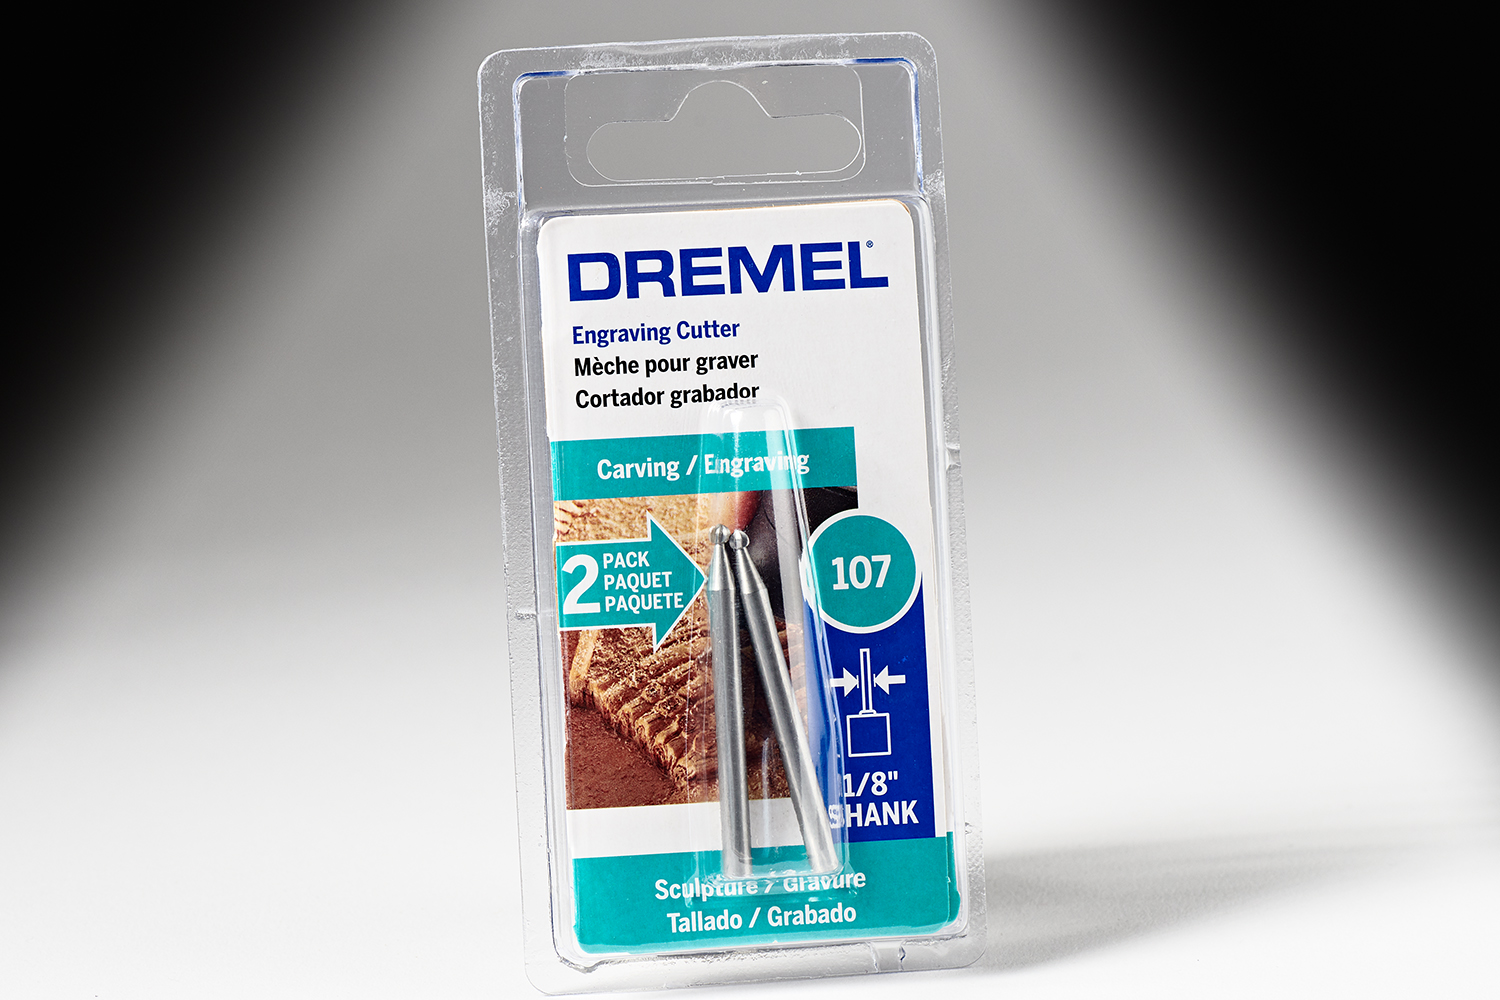 Dremel 105 Engraving Cutter, 1/8 Shank - Power Rotary Tool Accessories 